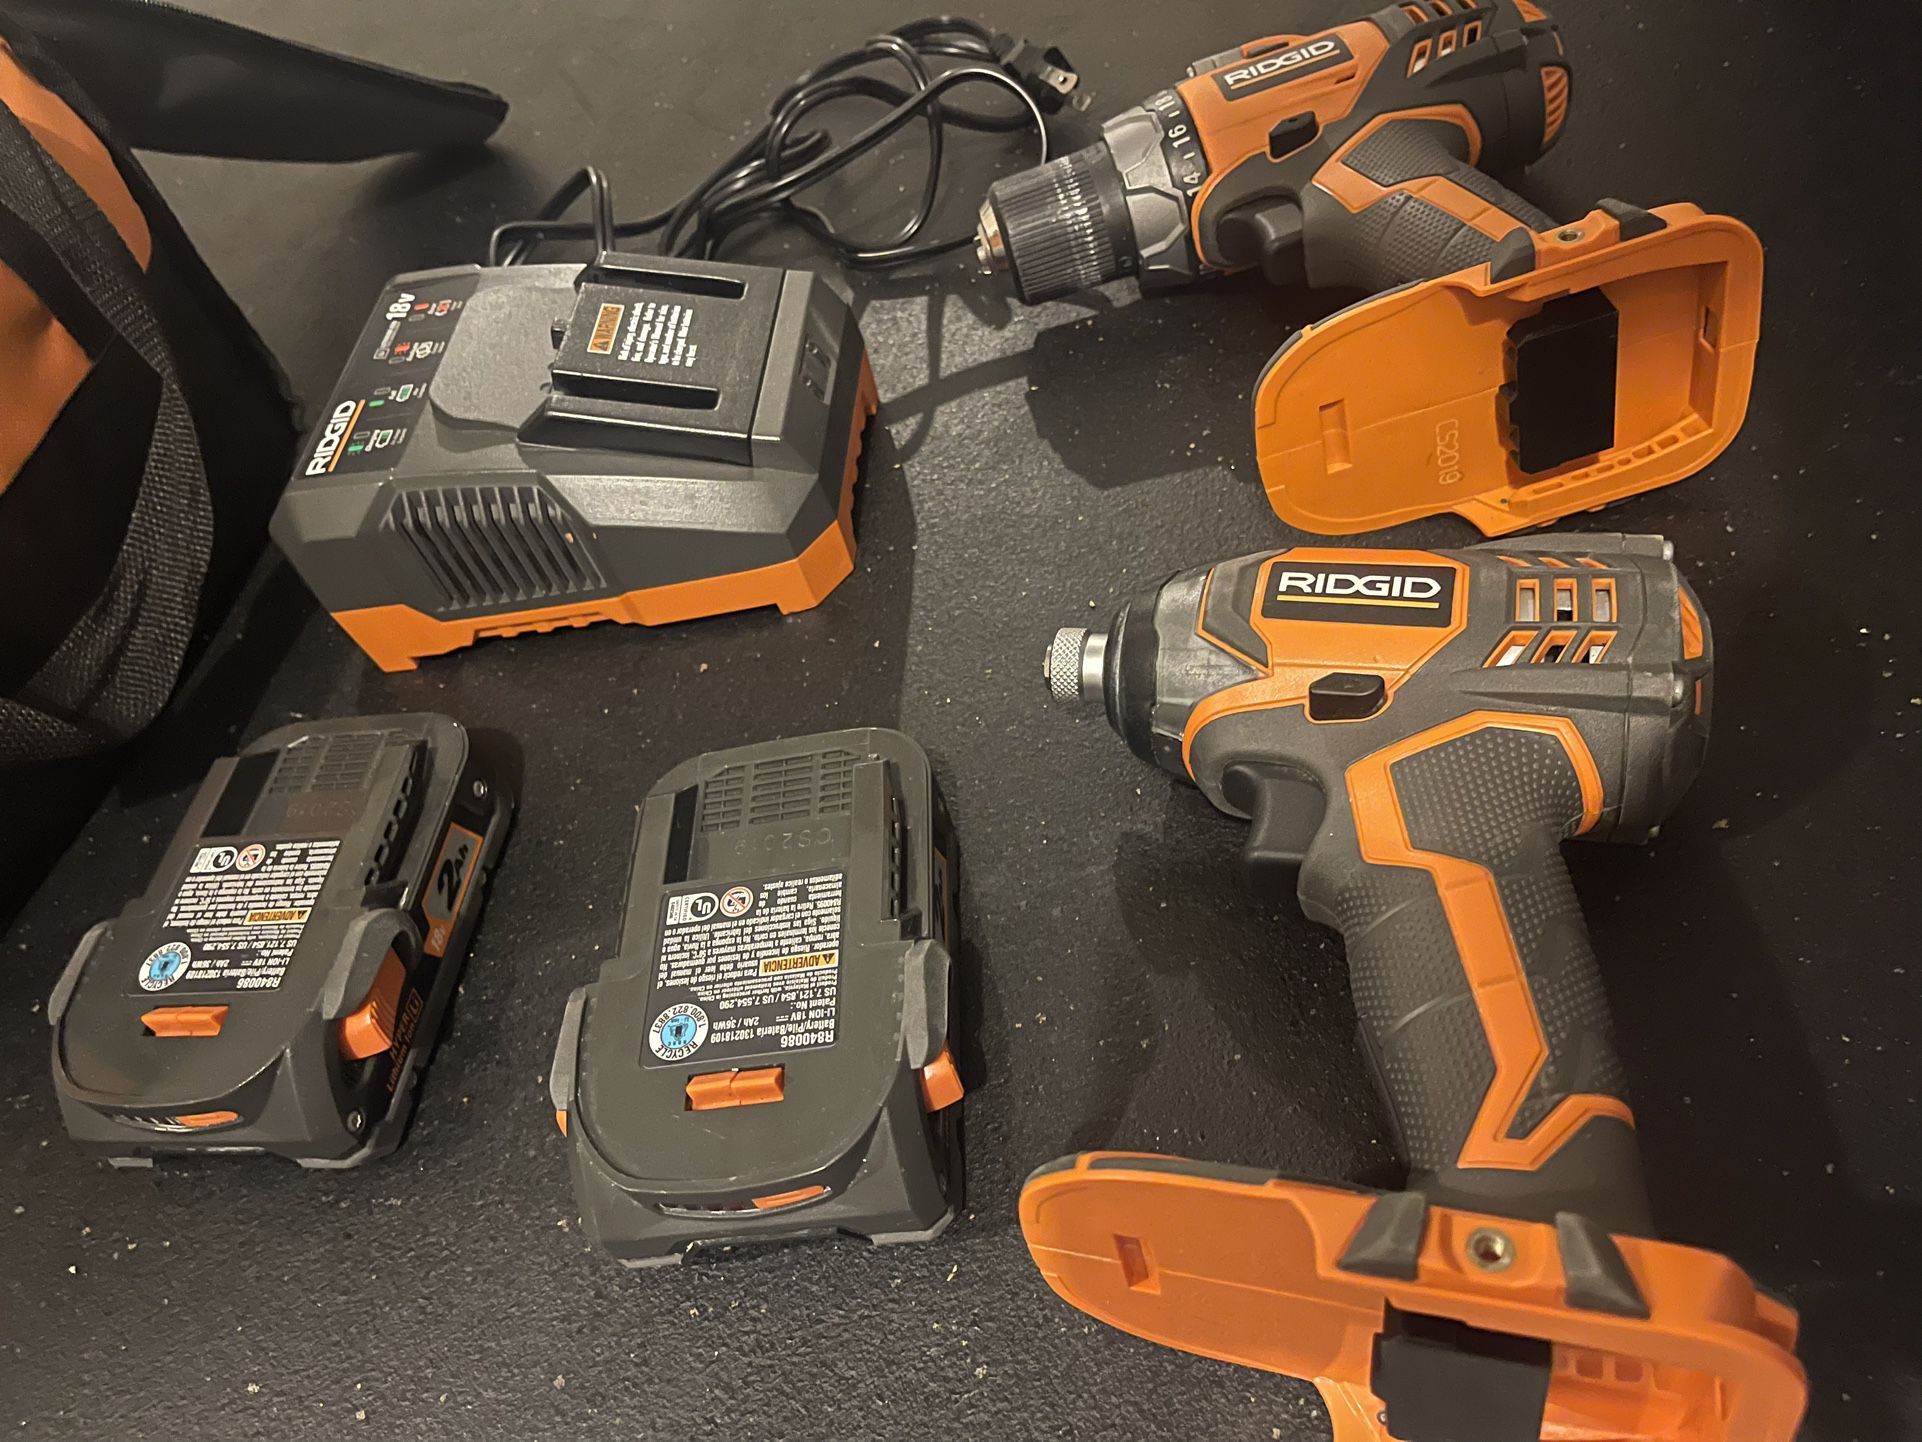 Tools- Power Drill, 2 Batteries, Charger, Carrying Bag